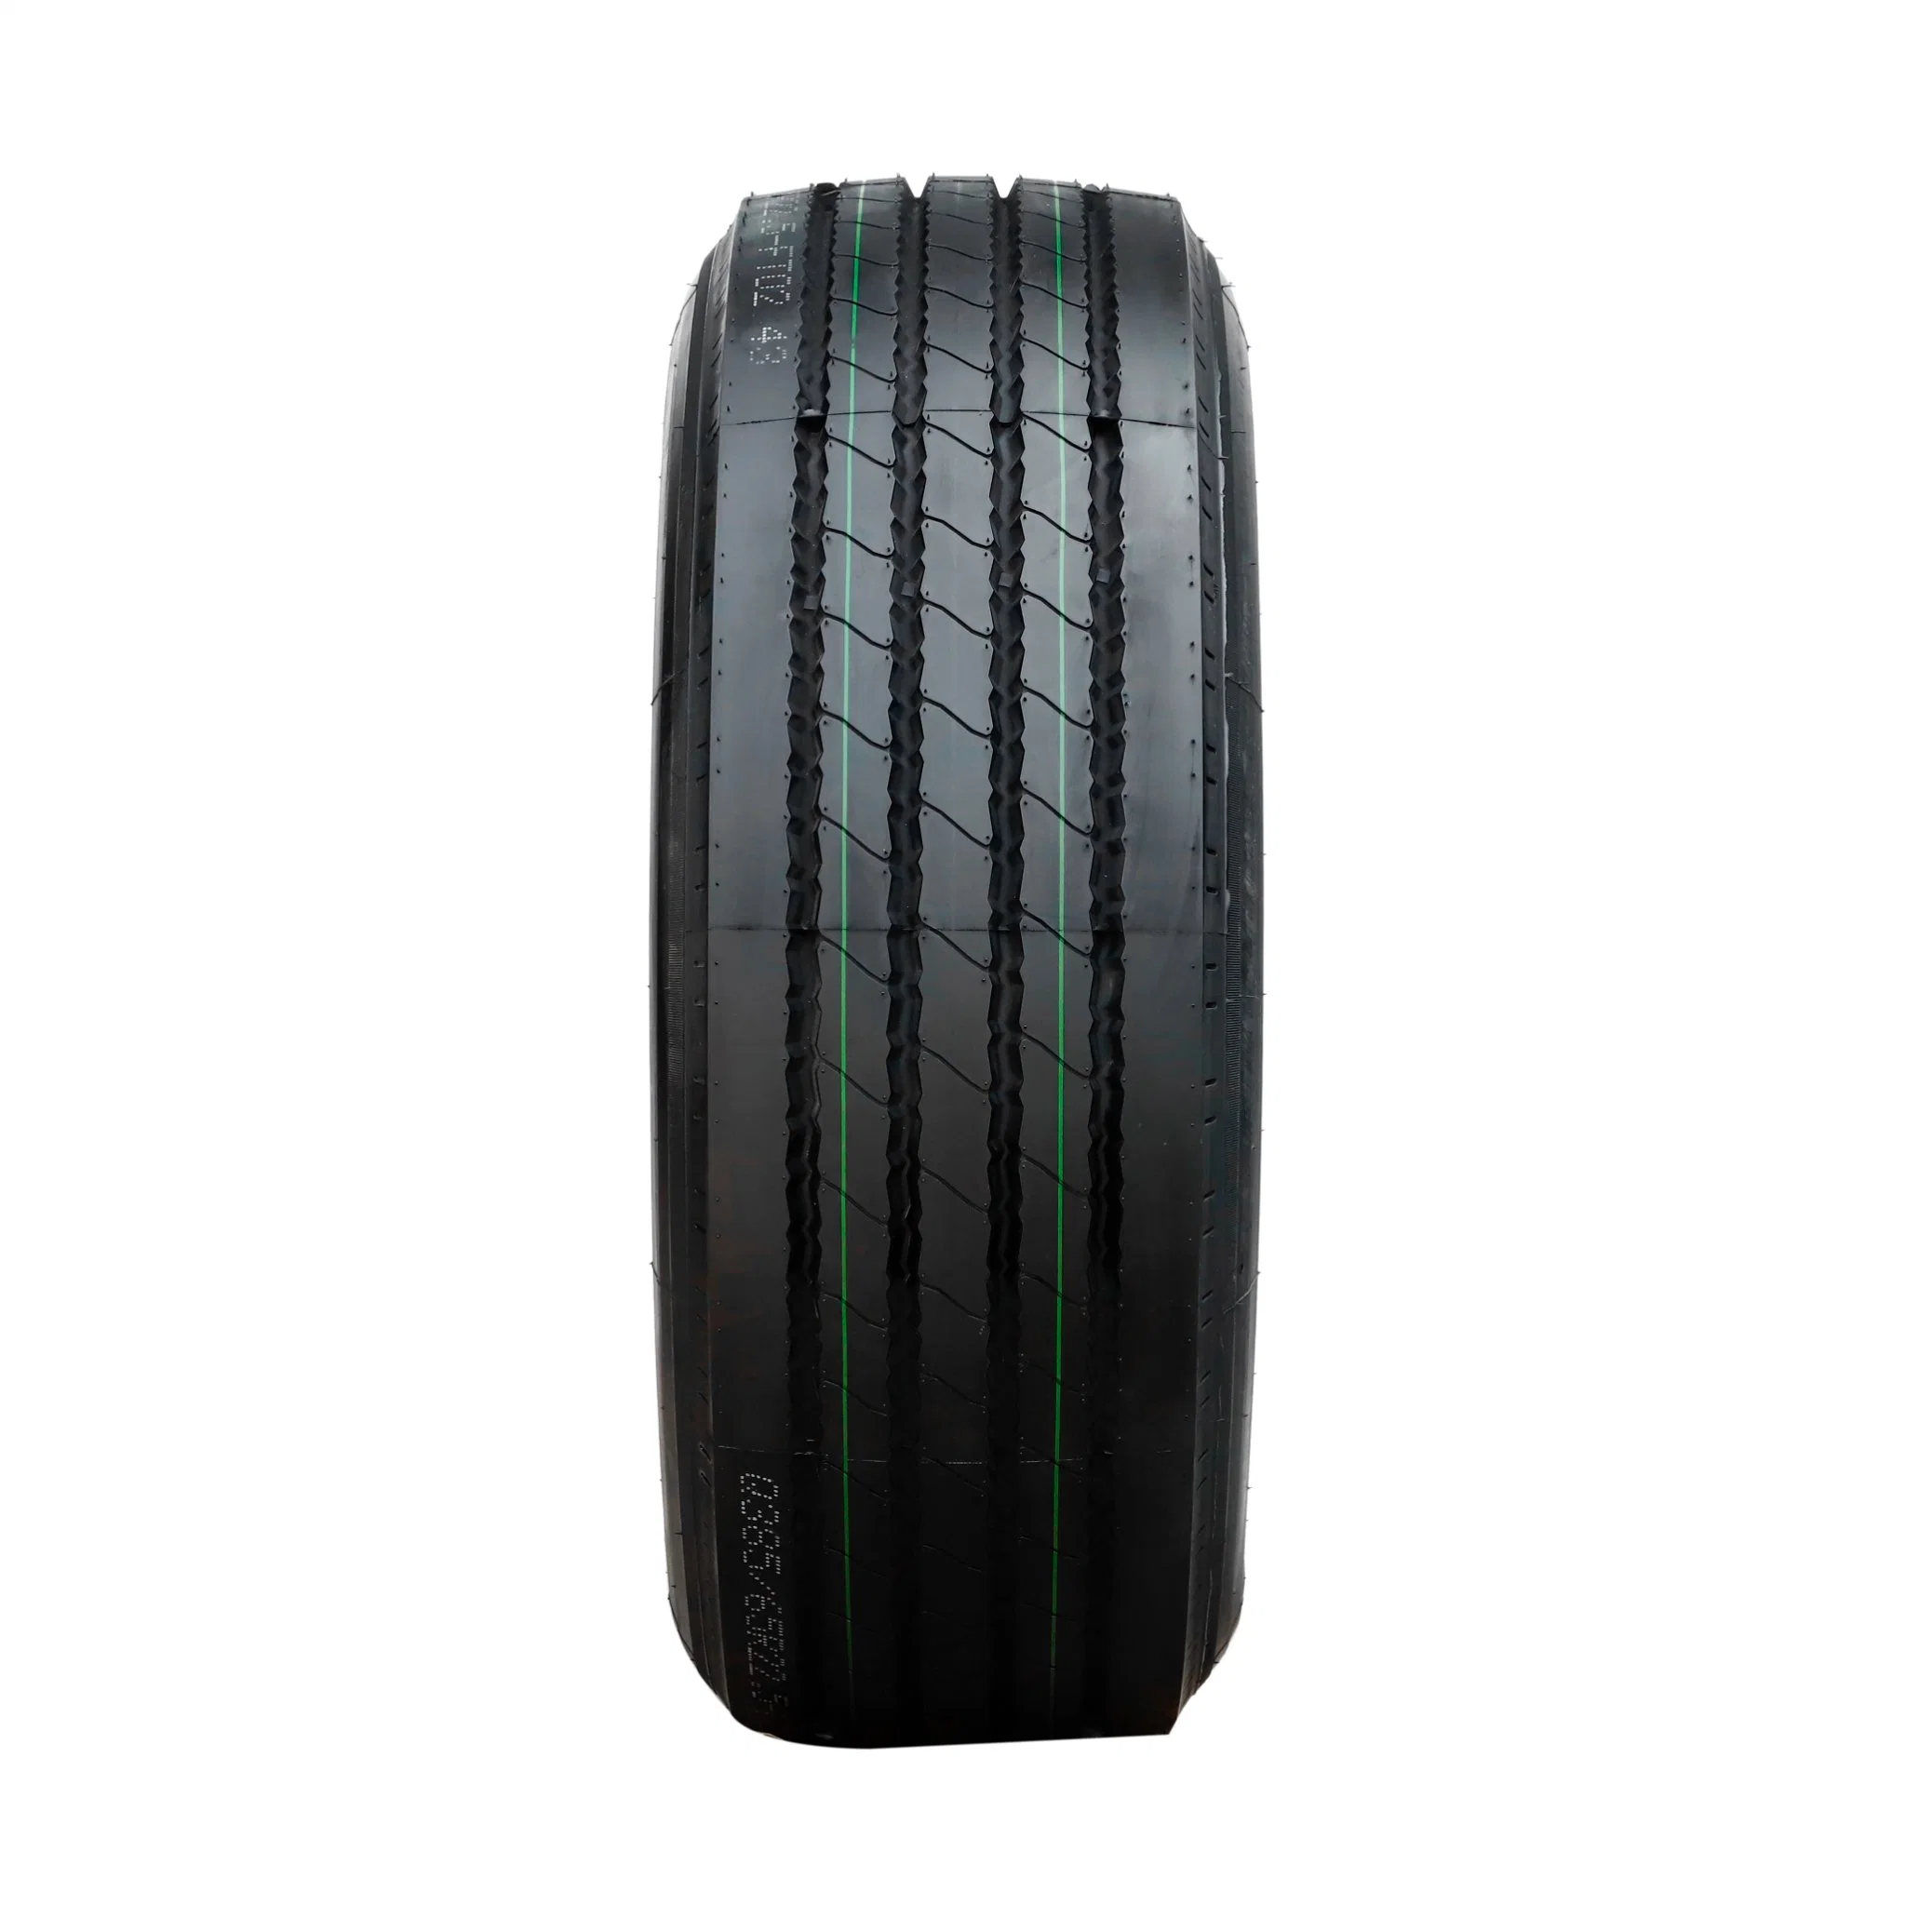 Wholesale Cheap China Tyres 38565r225 31570r22.5 11r22.5 Radial Tubeless All Steel 4+1 TBR Tire Semi Truck Tires